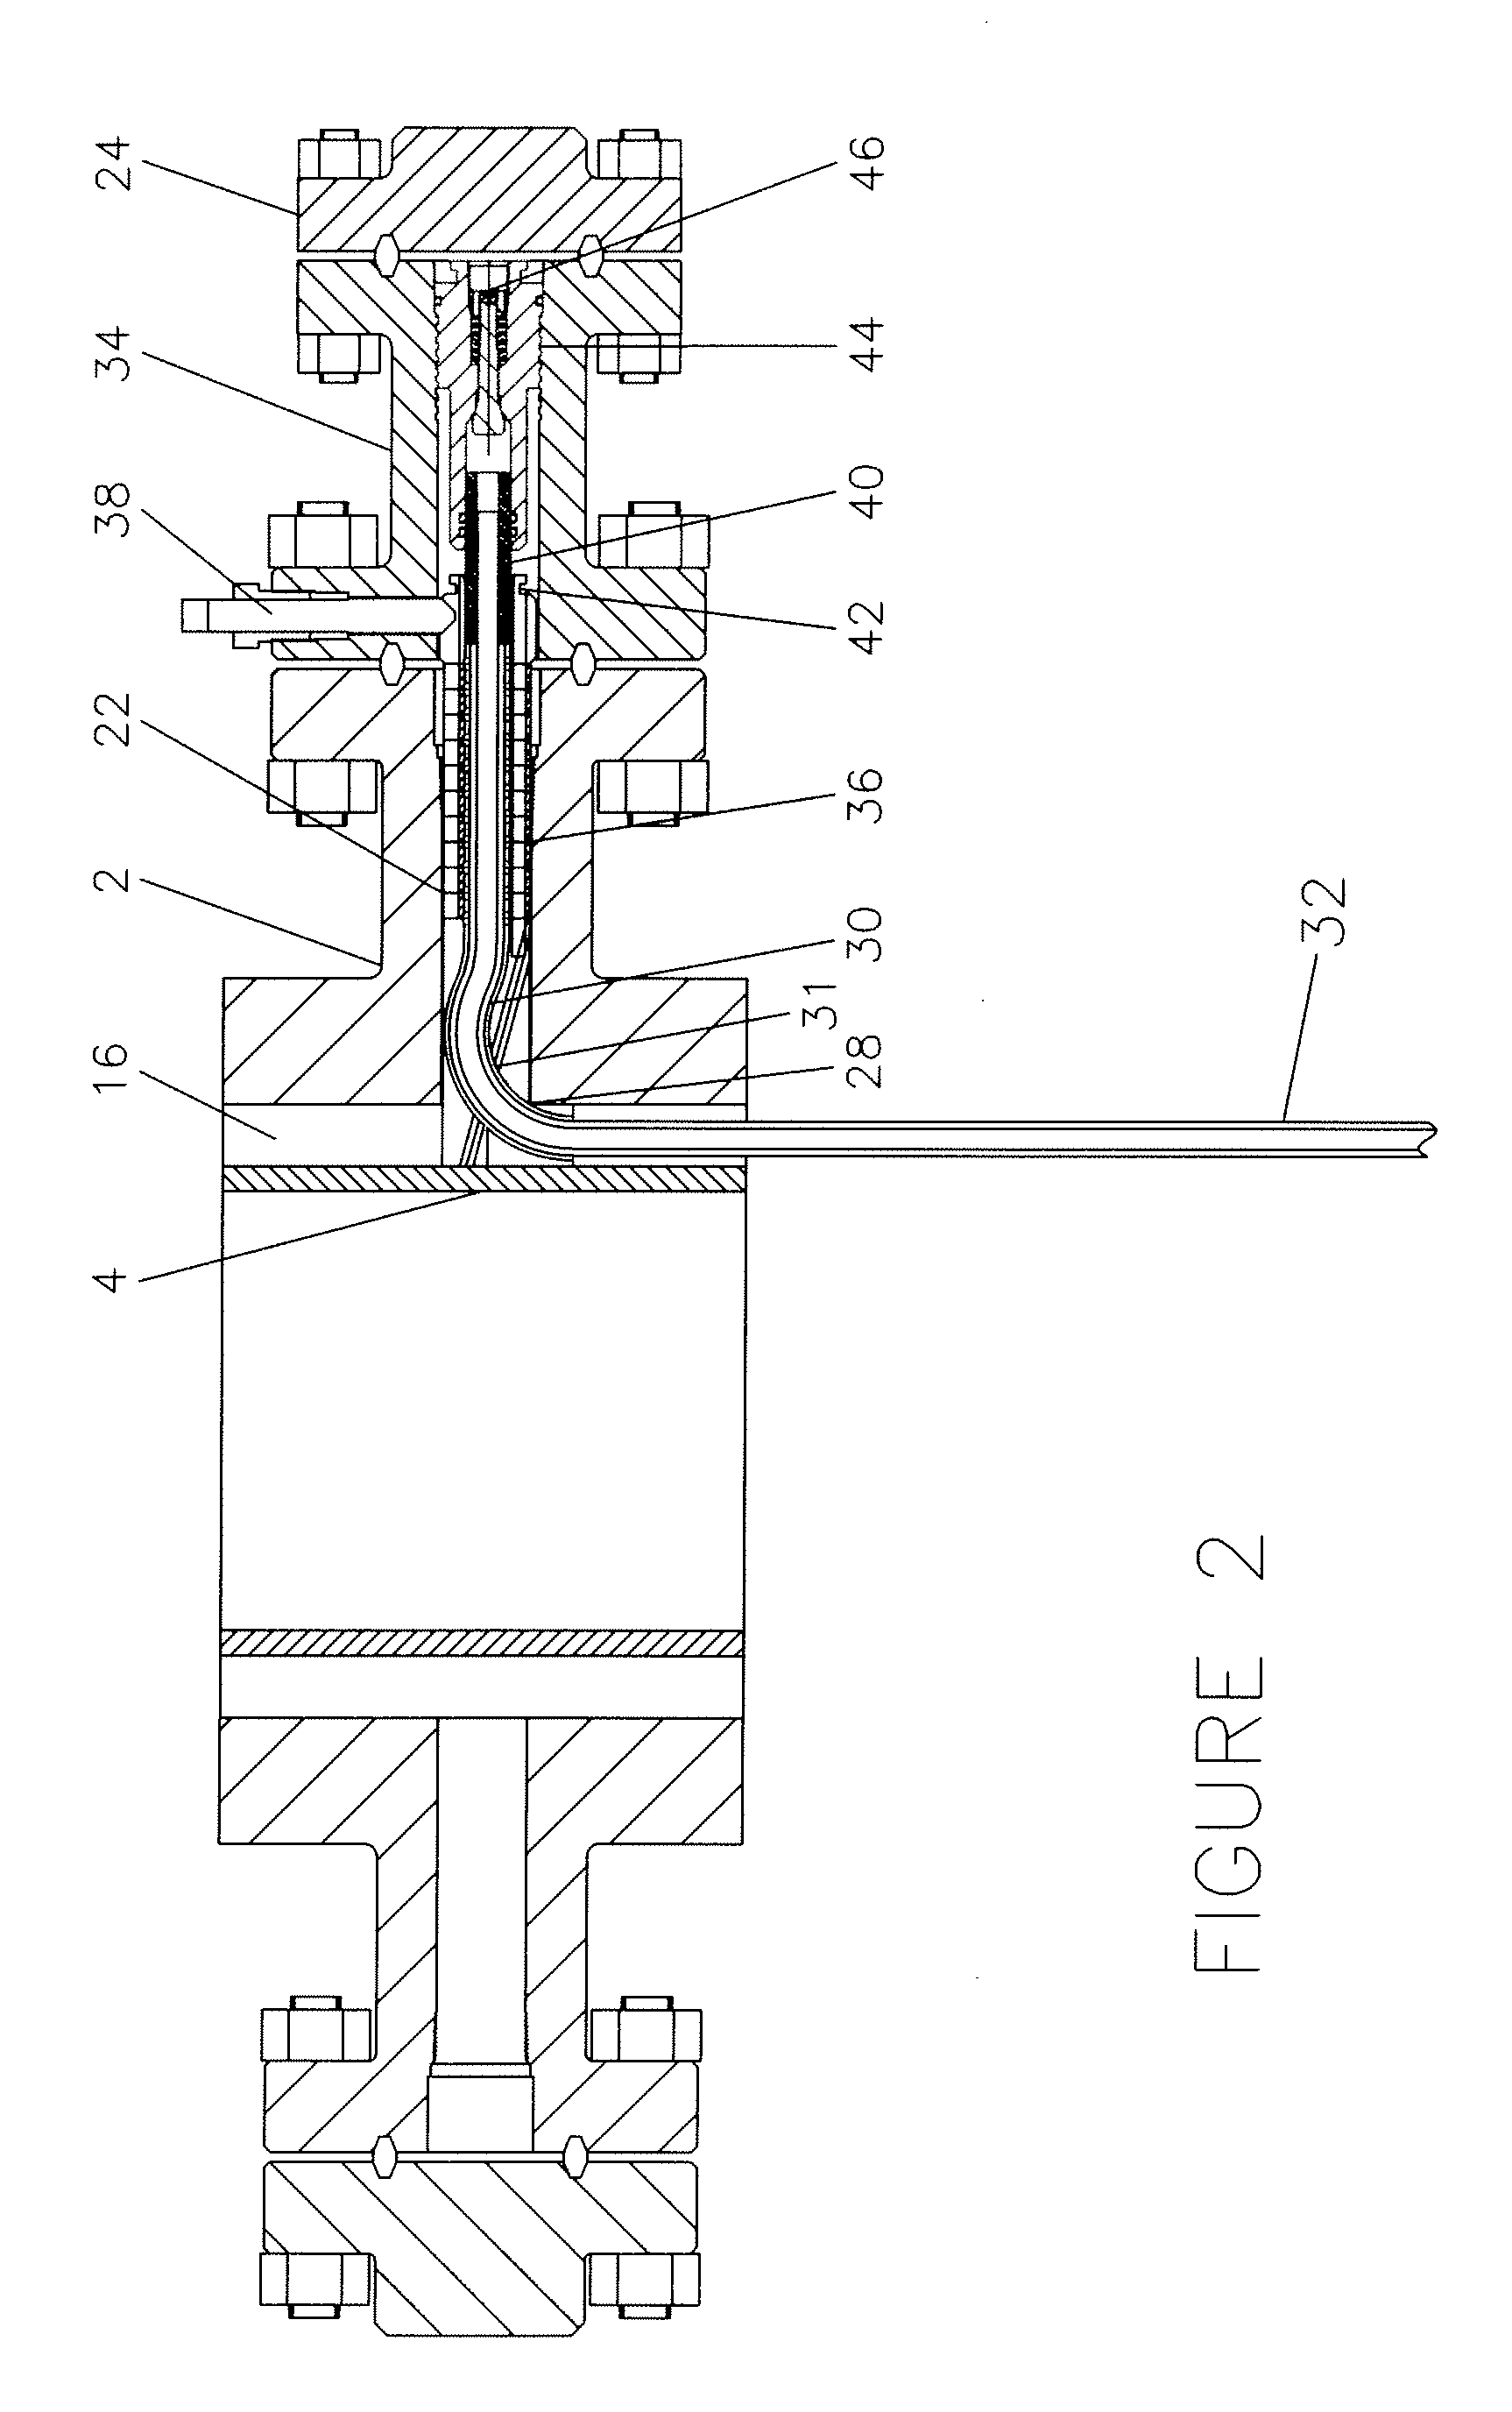 System and method of displacing fluids in an annulus